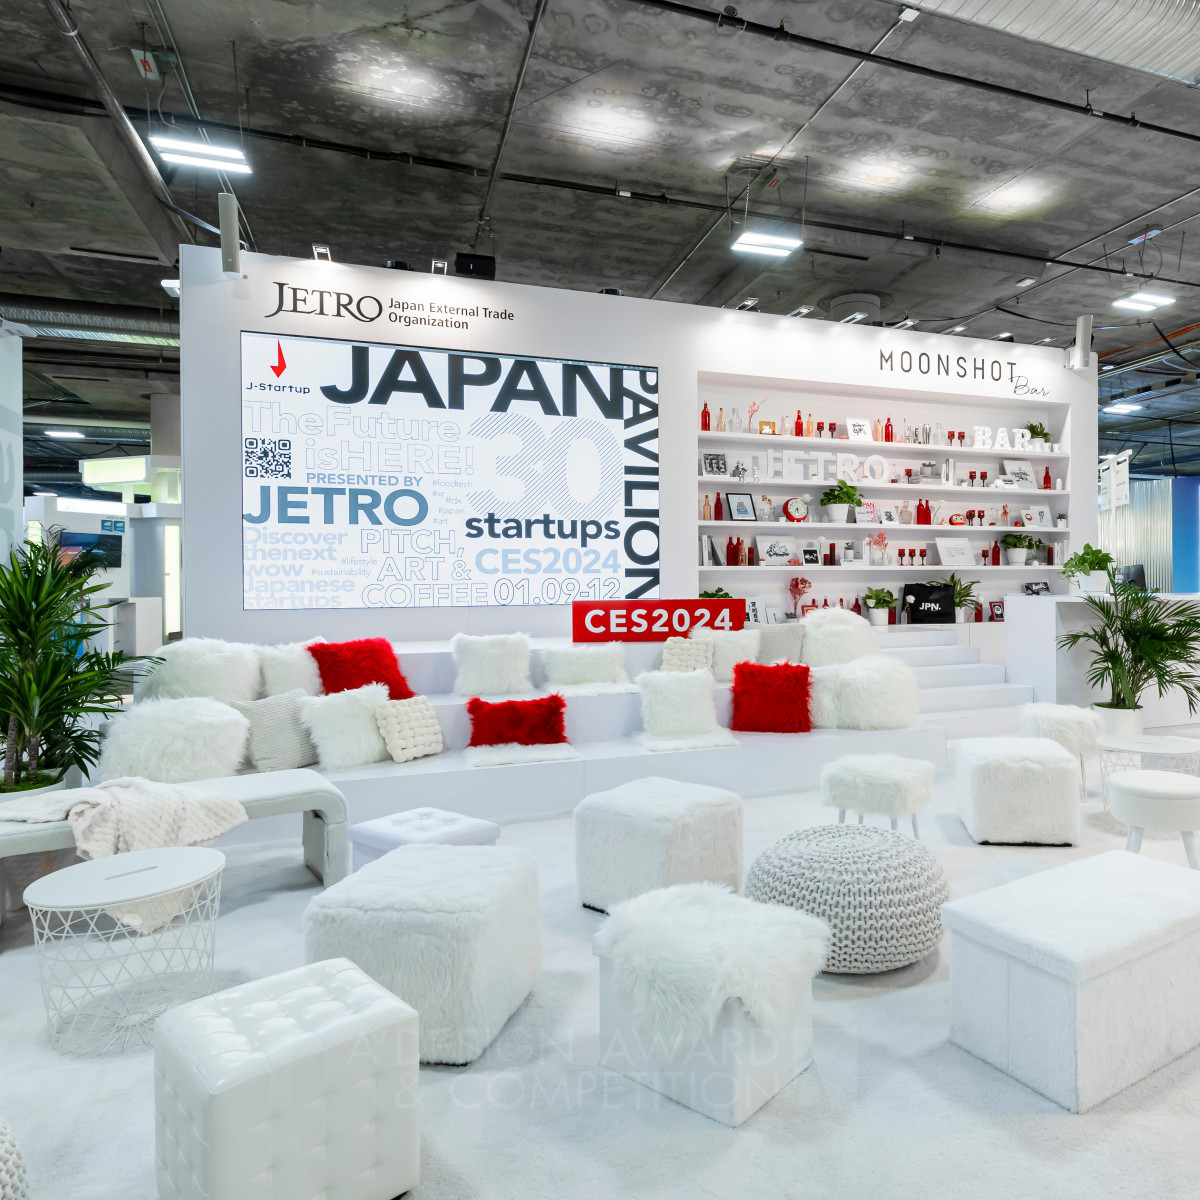 Takeshi Yoshida wins Bronze at the prestigious A' Trade Show Architecture, Interiors, and Exhibit Design Award with Moonshot Bar Exhibition Booth.